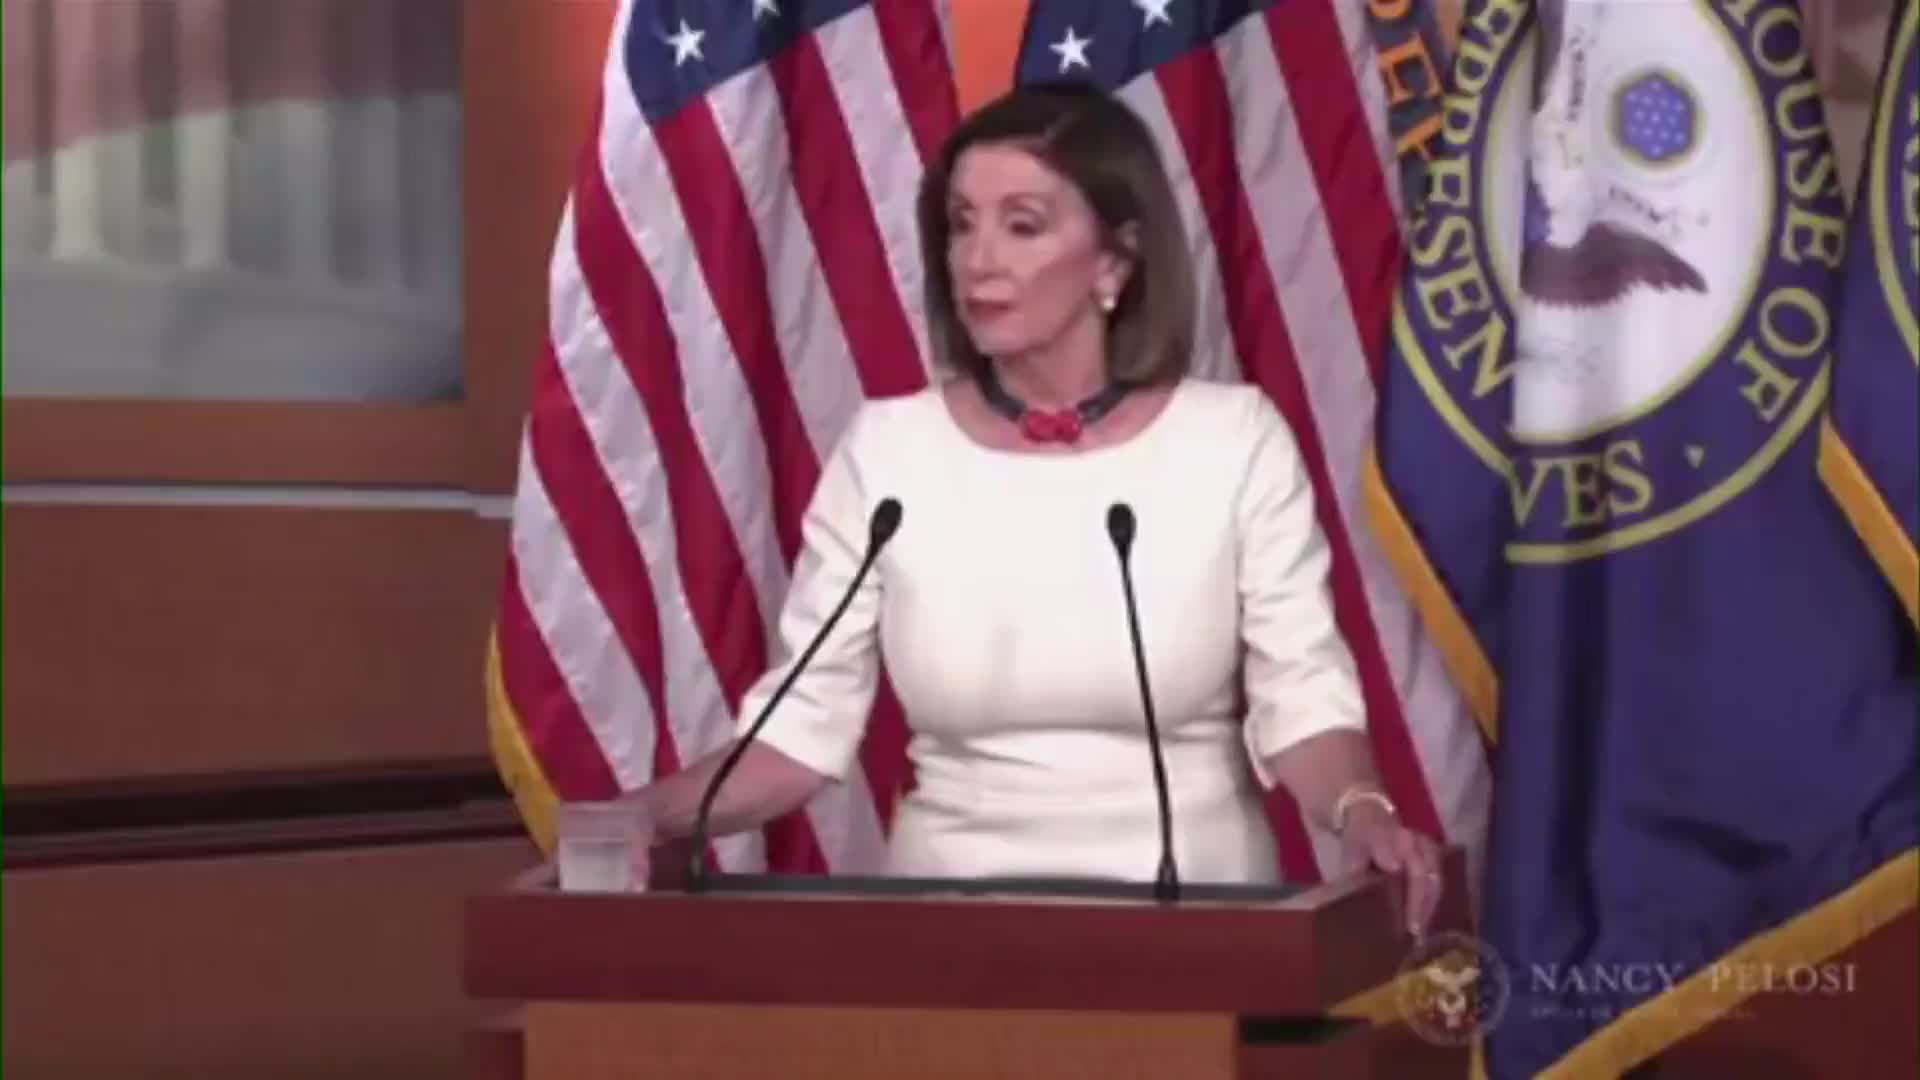 Pelosi vs. Trump: Combatants in a historic impeachment showdown that will test them, and the nation